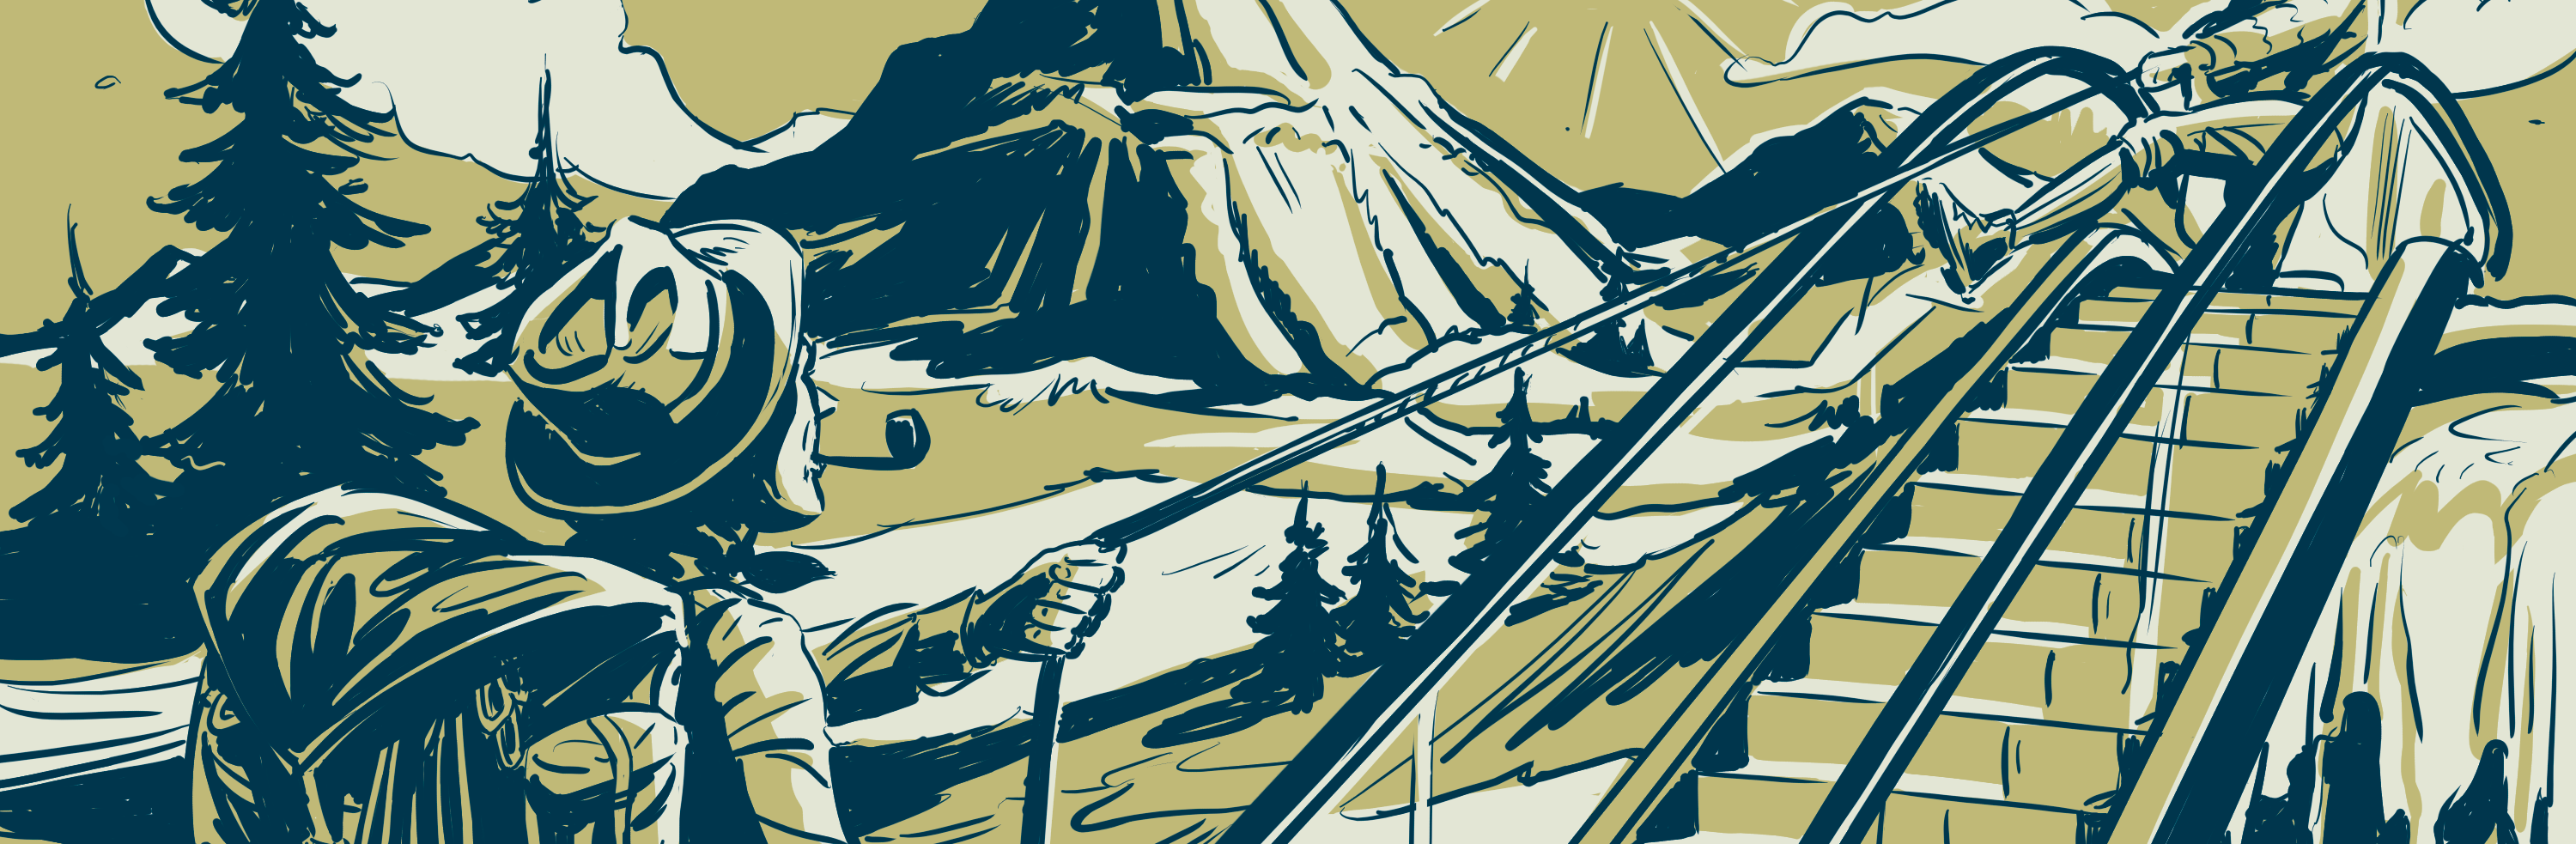 Illustration of mountain scene with a pair of climbers scaling an escalator with ropes to get to the wilderness